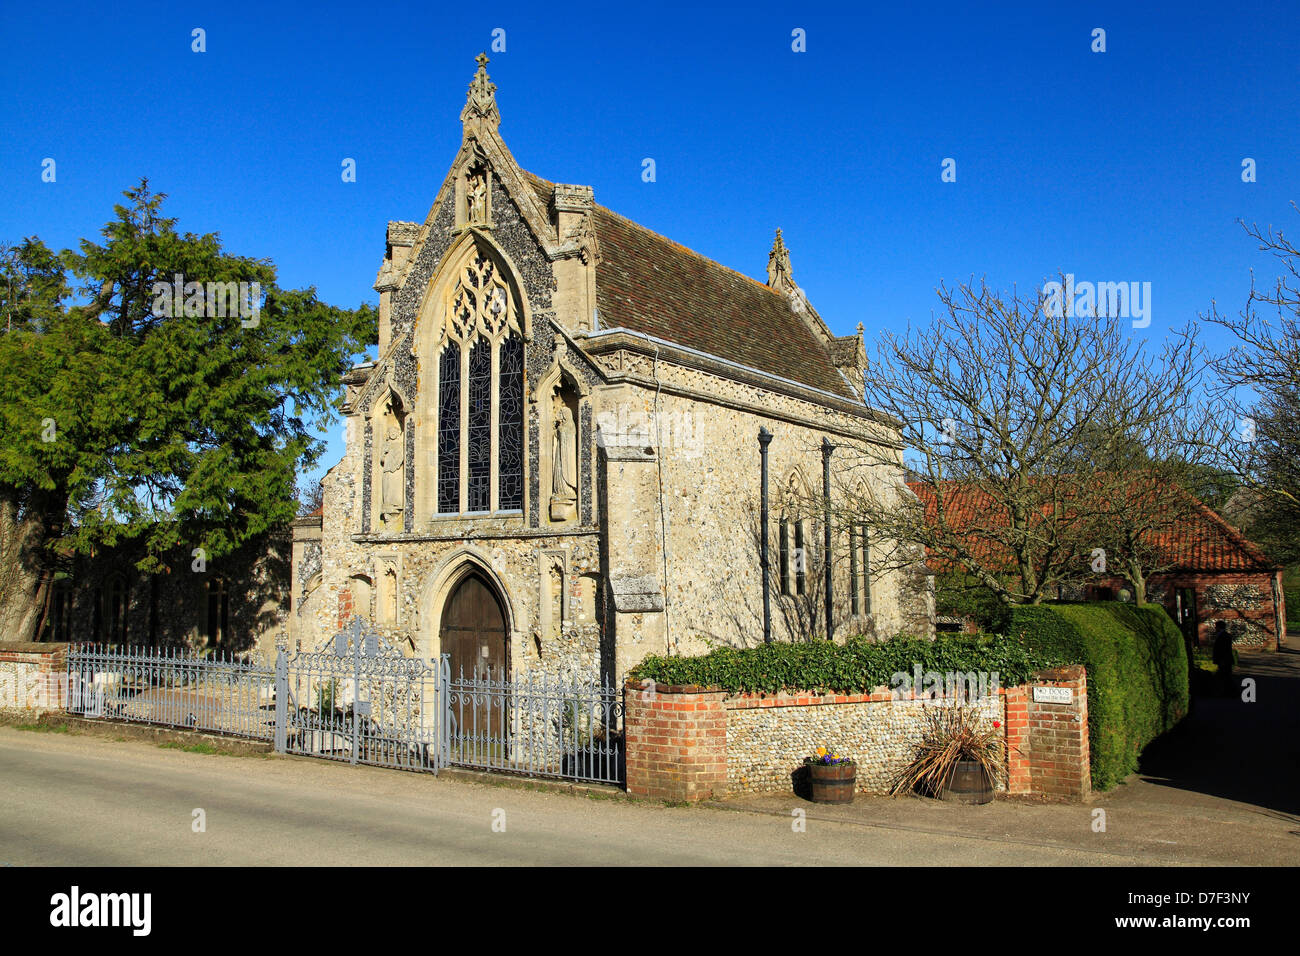 Houghton St. Giles, Norfolk, The Slipper Chapel, English Medieval chapels architecture England UK Stock Photo